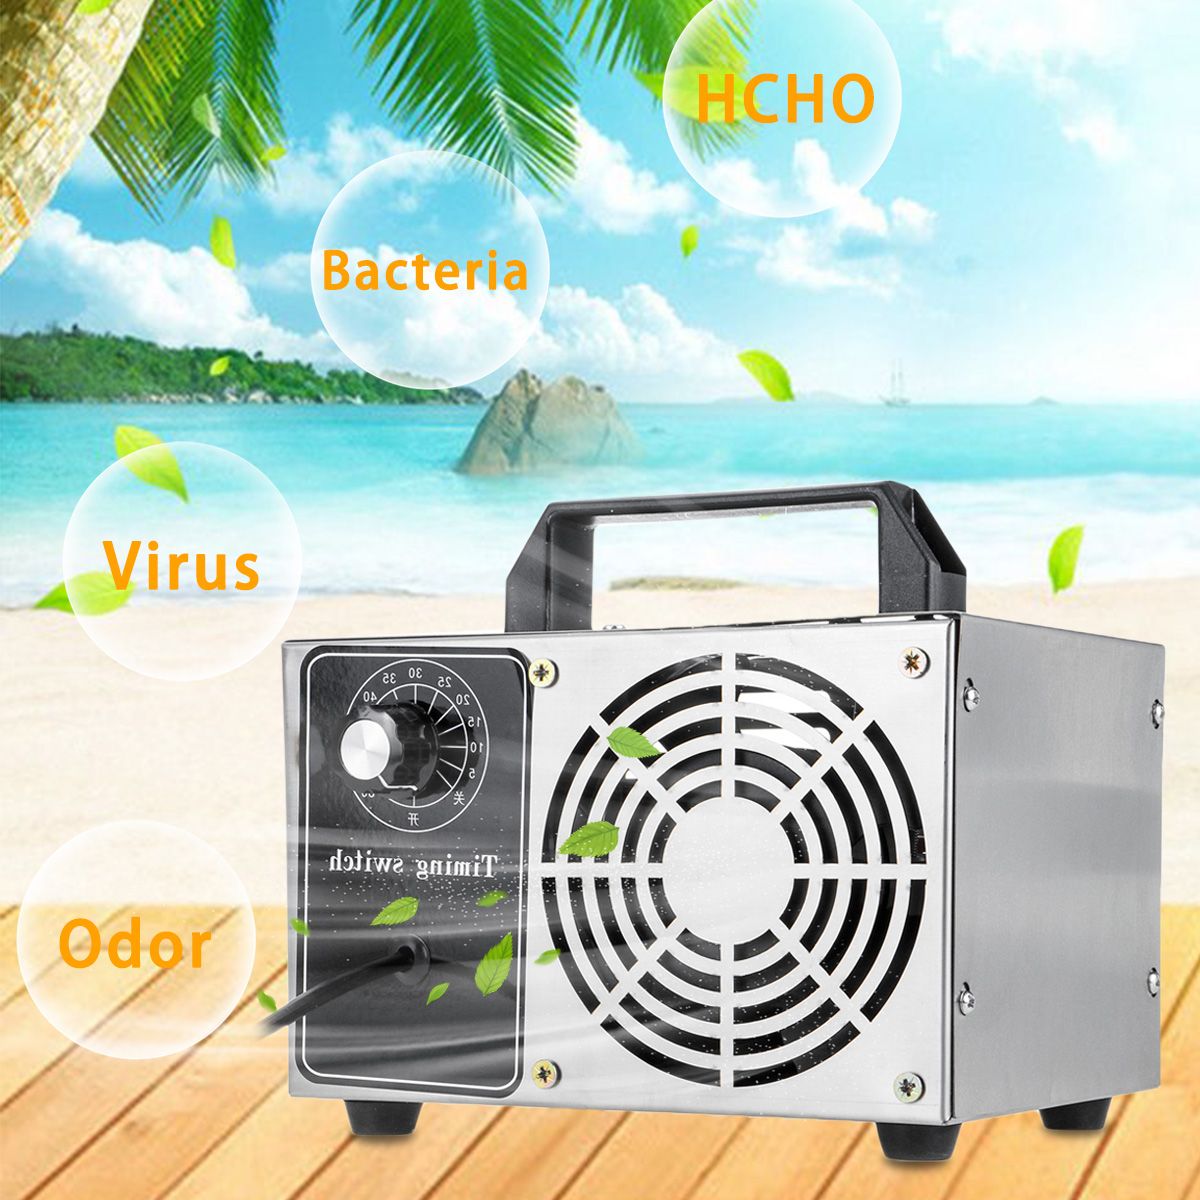 110V220V-20gh-Ozone-Generator-Air-purifier-with-Timing-Switch-for-Home-Office-1667840